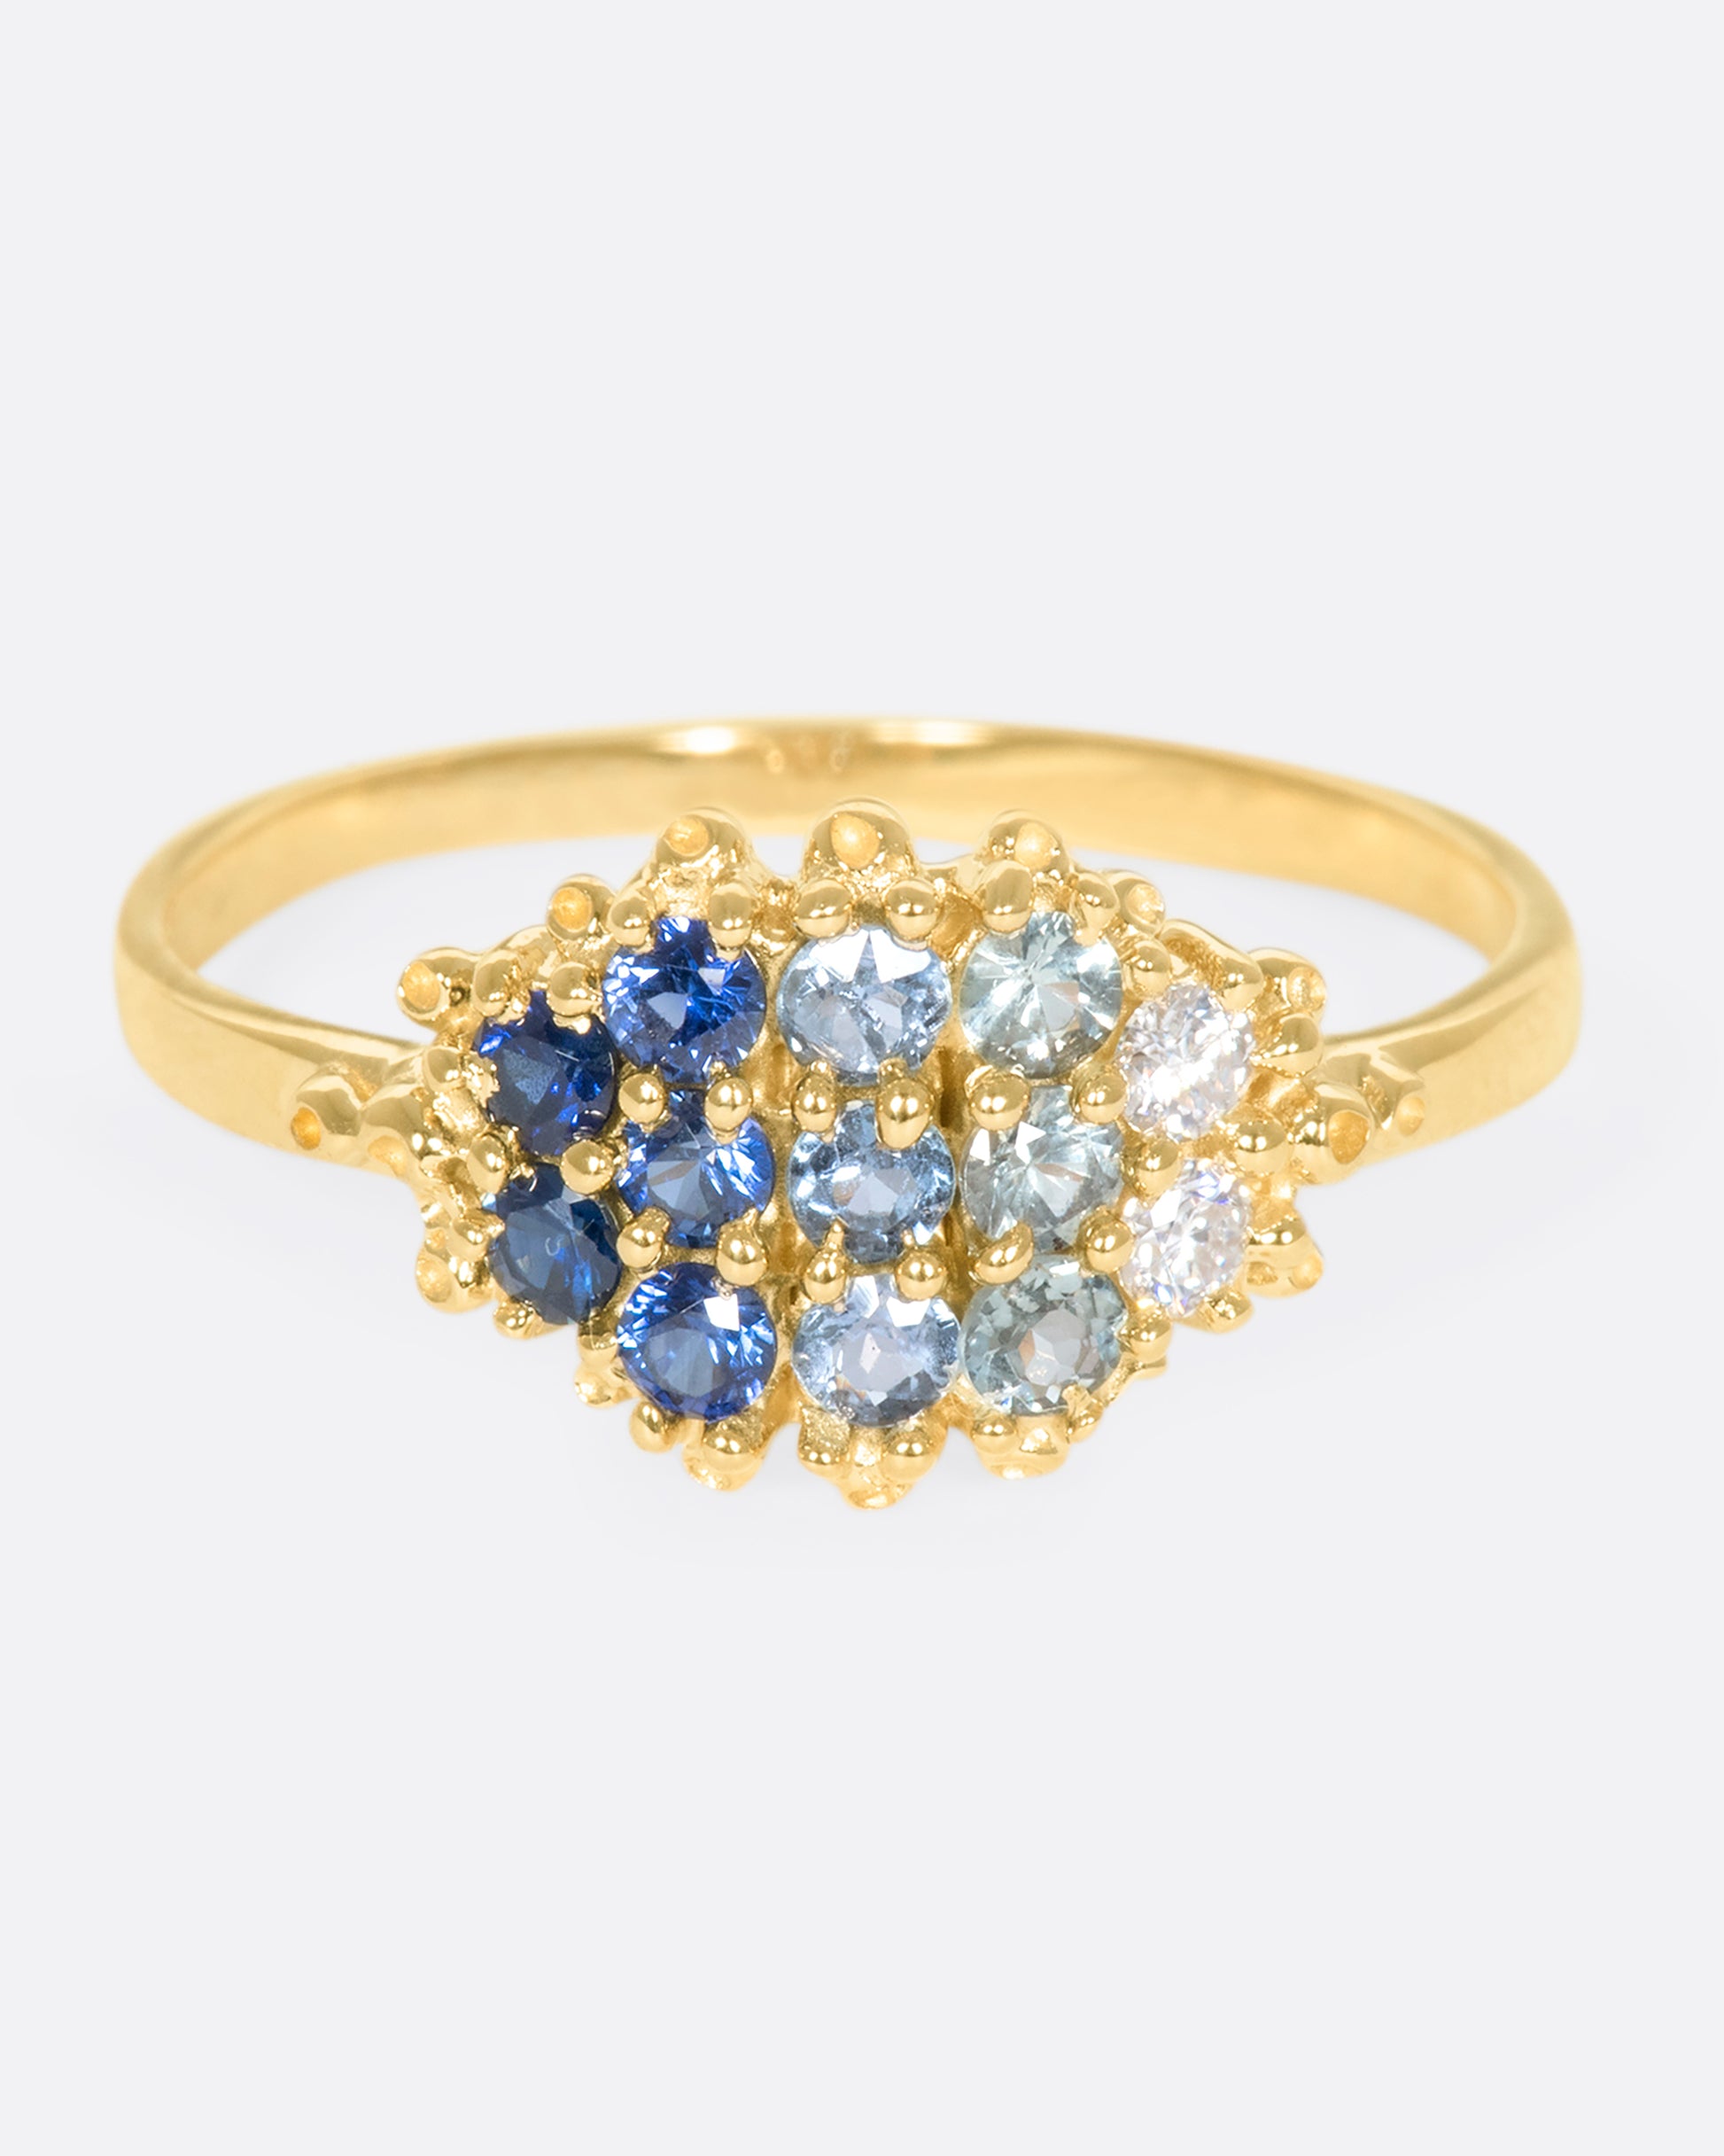 A view of the face of a yellow gold ring with 12 sapphires in a range of blue shades.